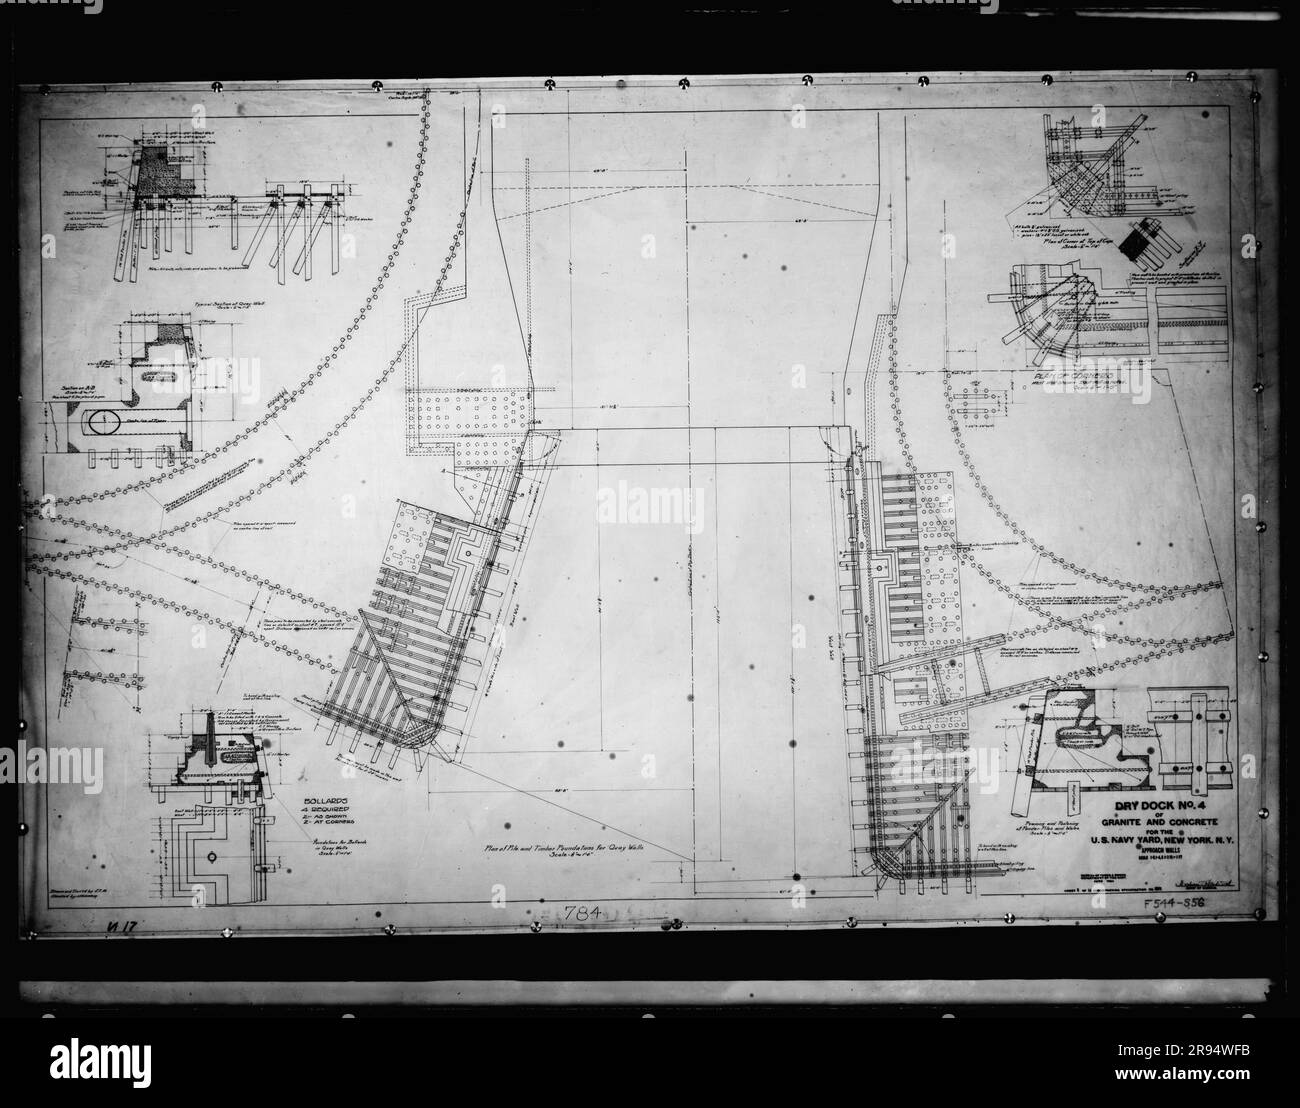 Drawing: Dry Dock Number 4, Granite and Concrete for the US Navy Yard, New York, New York, Approach Walls. Glass Plate Negatives of the Construction and Repair of Buildings, Facilities, and Vessels at the New York Navy Yard. Stock Photo